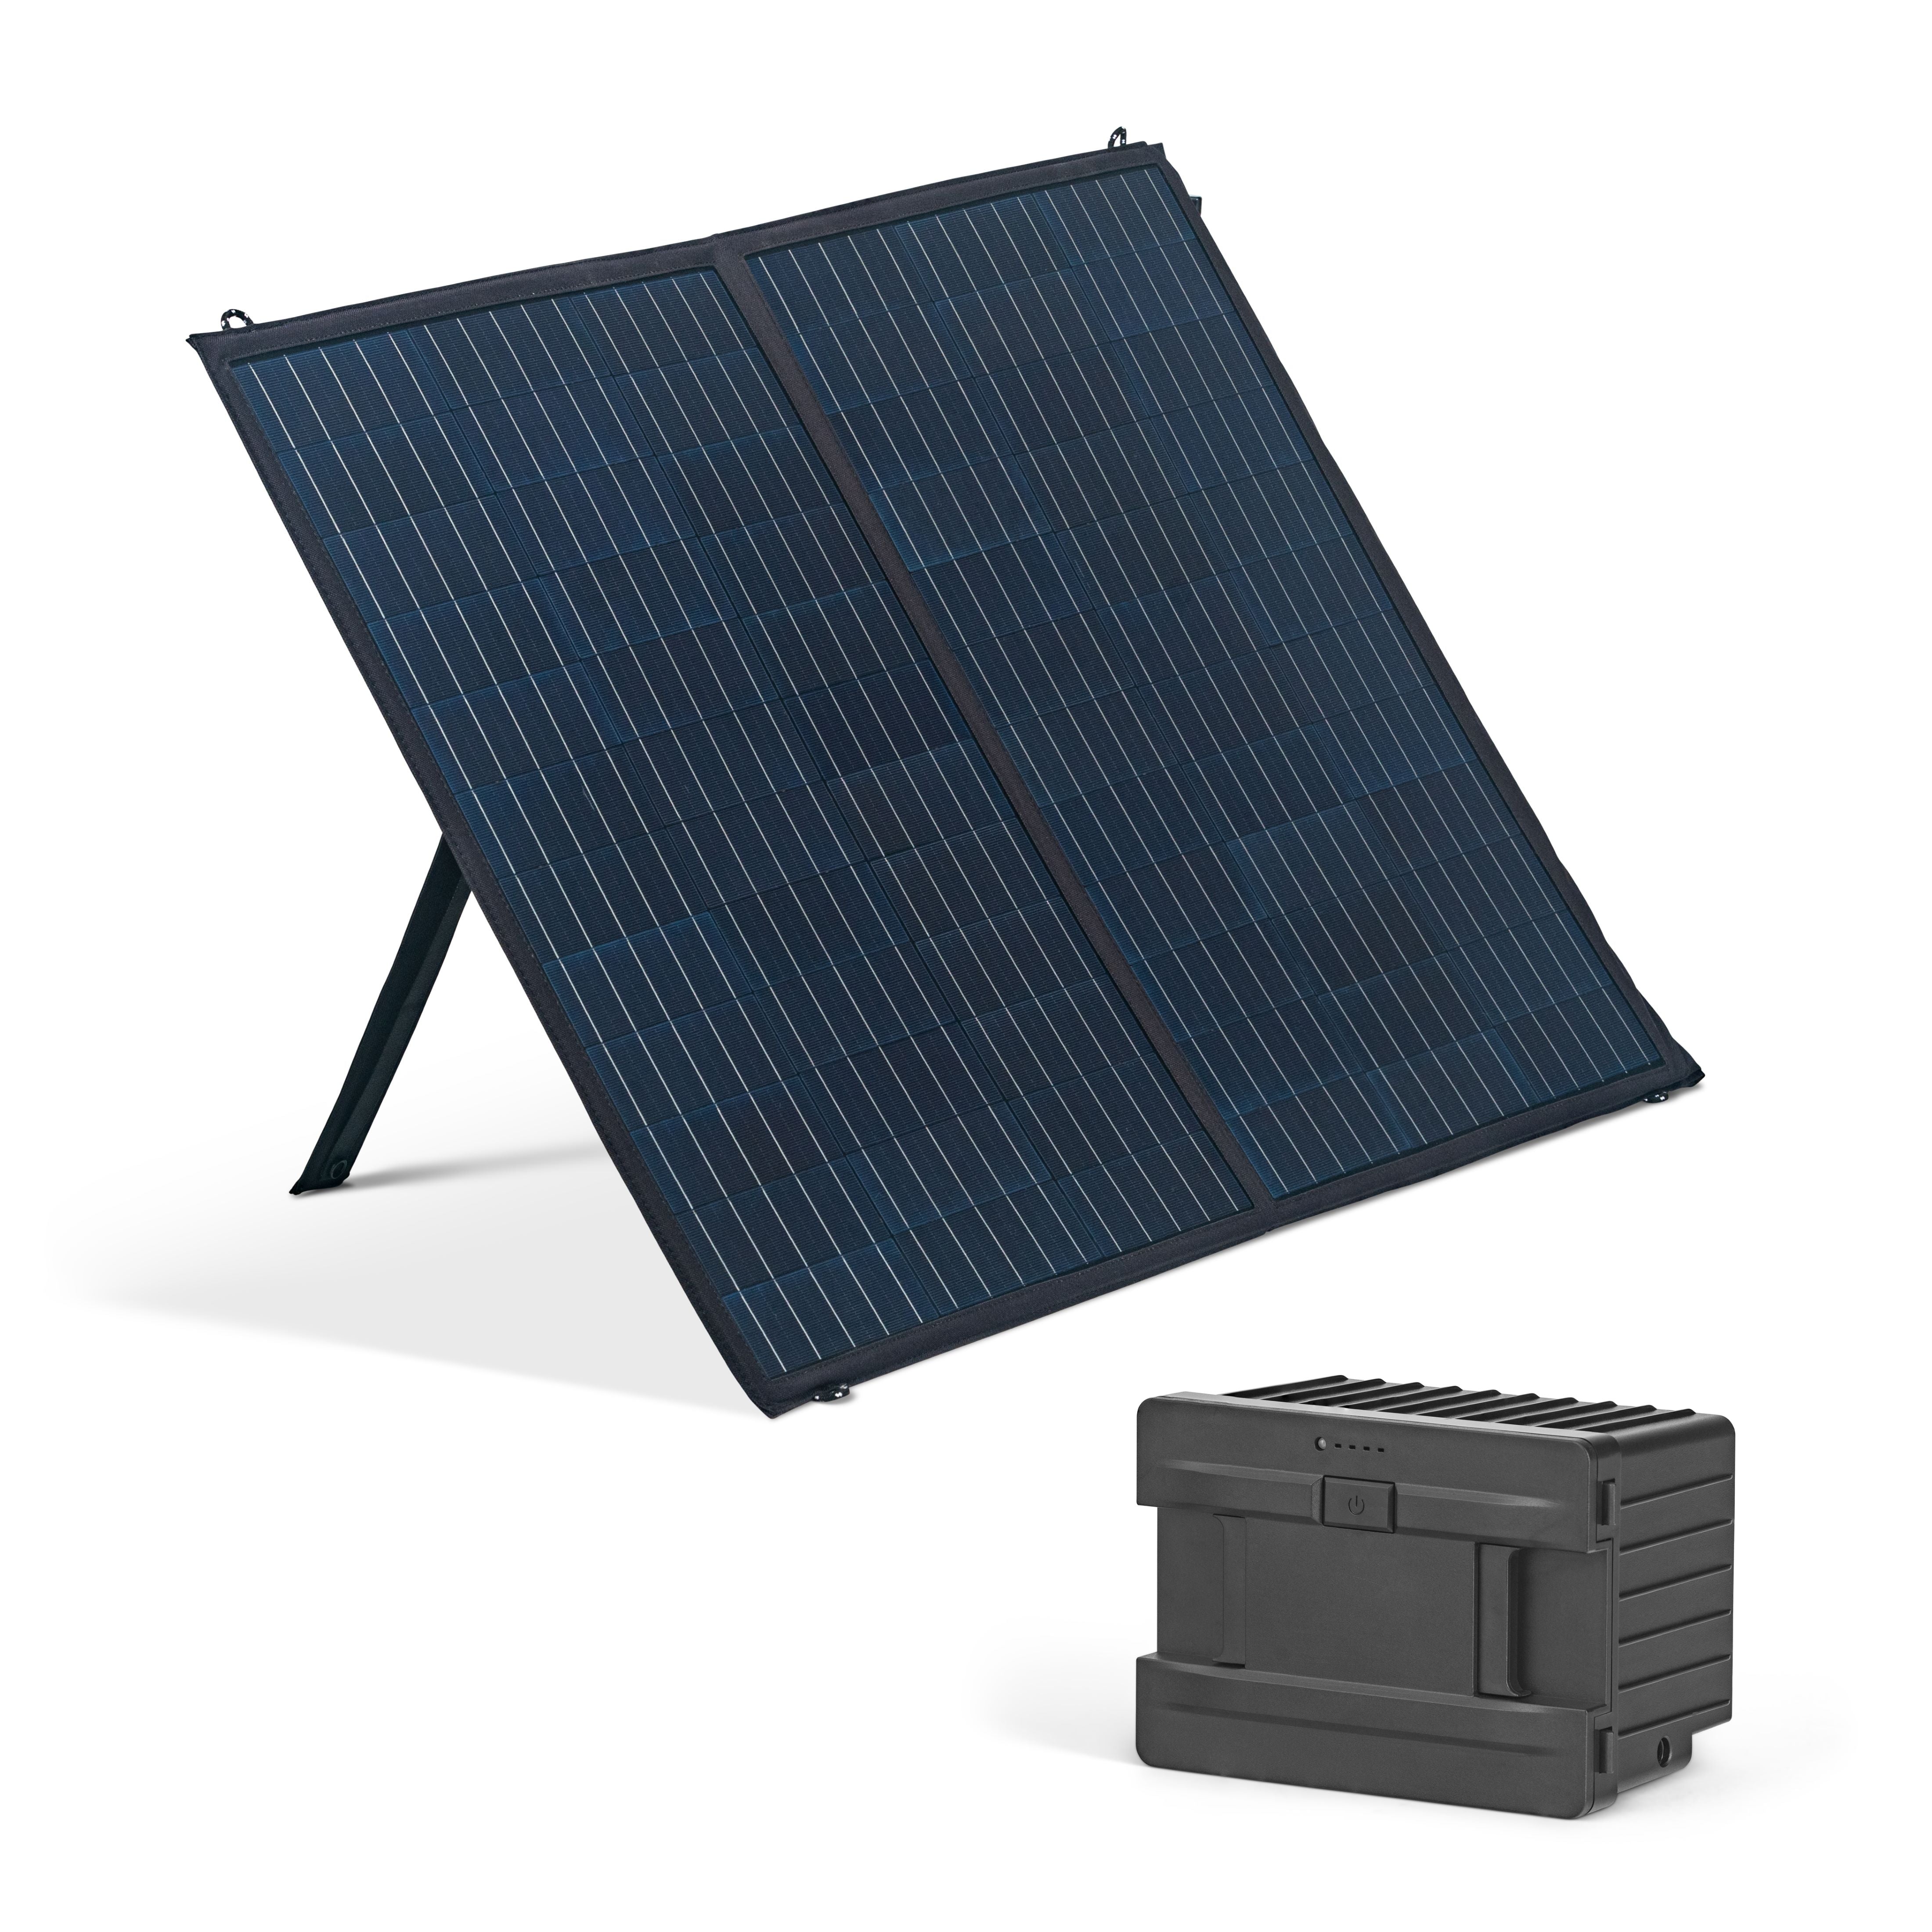 NewAir Solar Generator Kit with 100W Solar Panel and 173W Removeable/Rechargeable Lithium Battery, Connects to DC 12V/24V Electric Car Fridge and